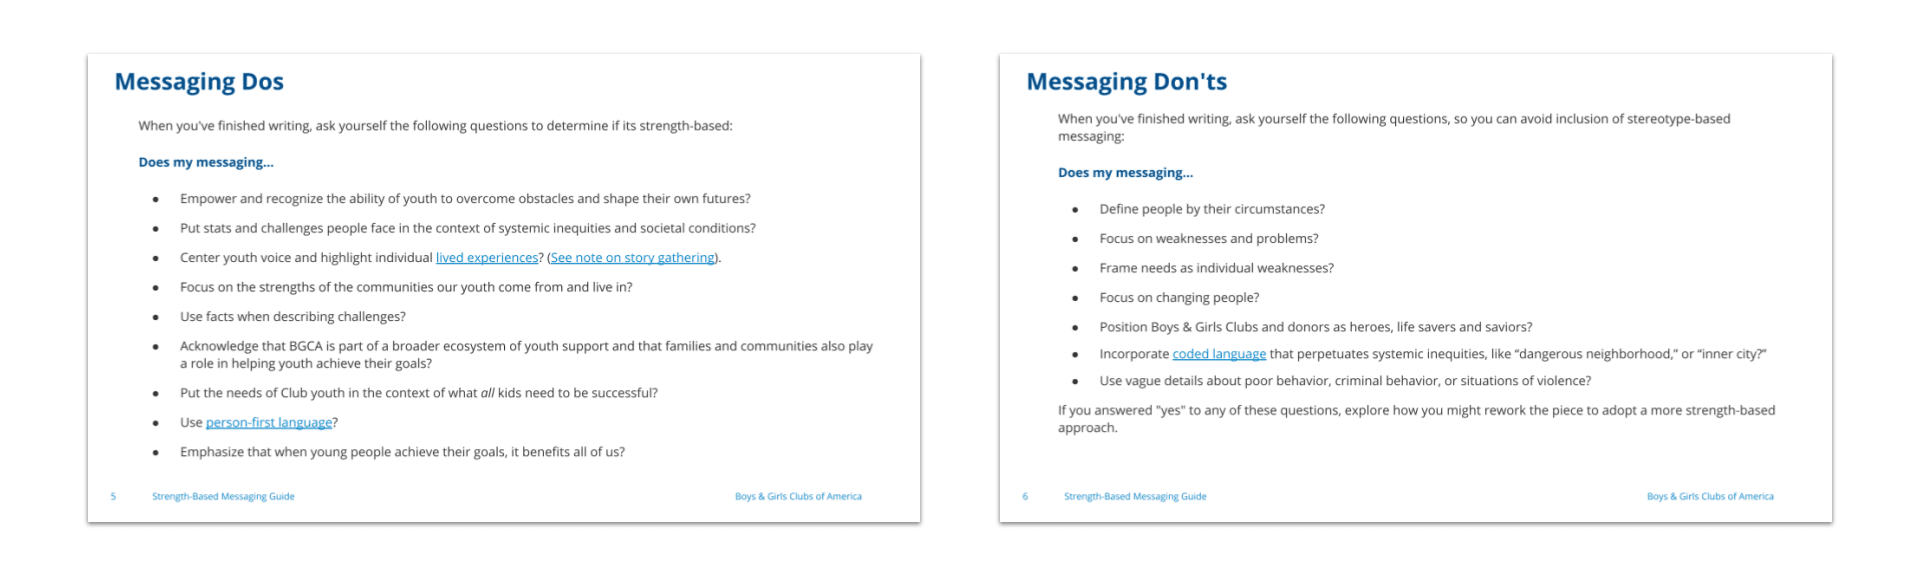 Two sample slides from the Boys and Girls Clubs strength-based messaging guide - messaging dos and messaging don'ts